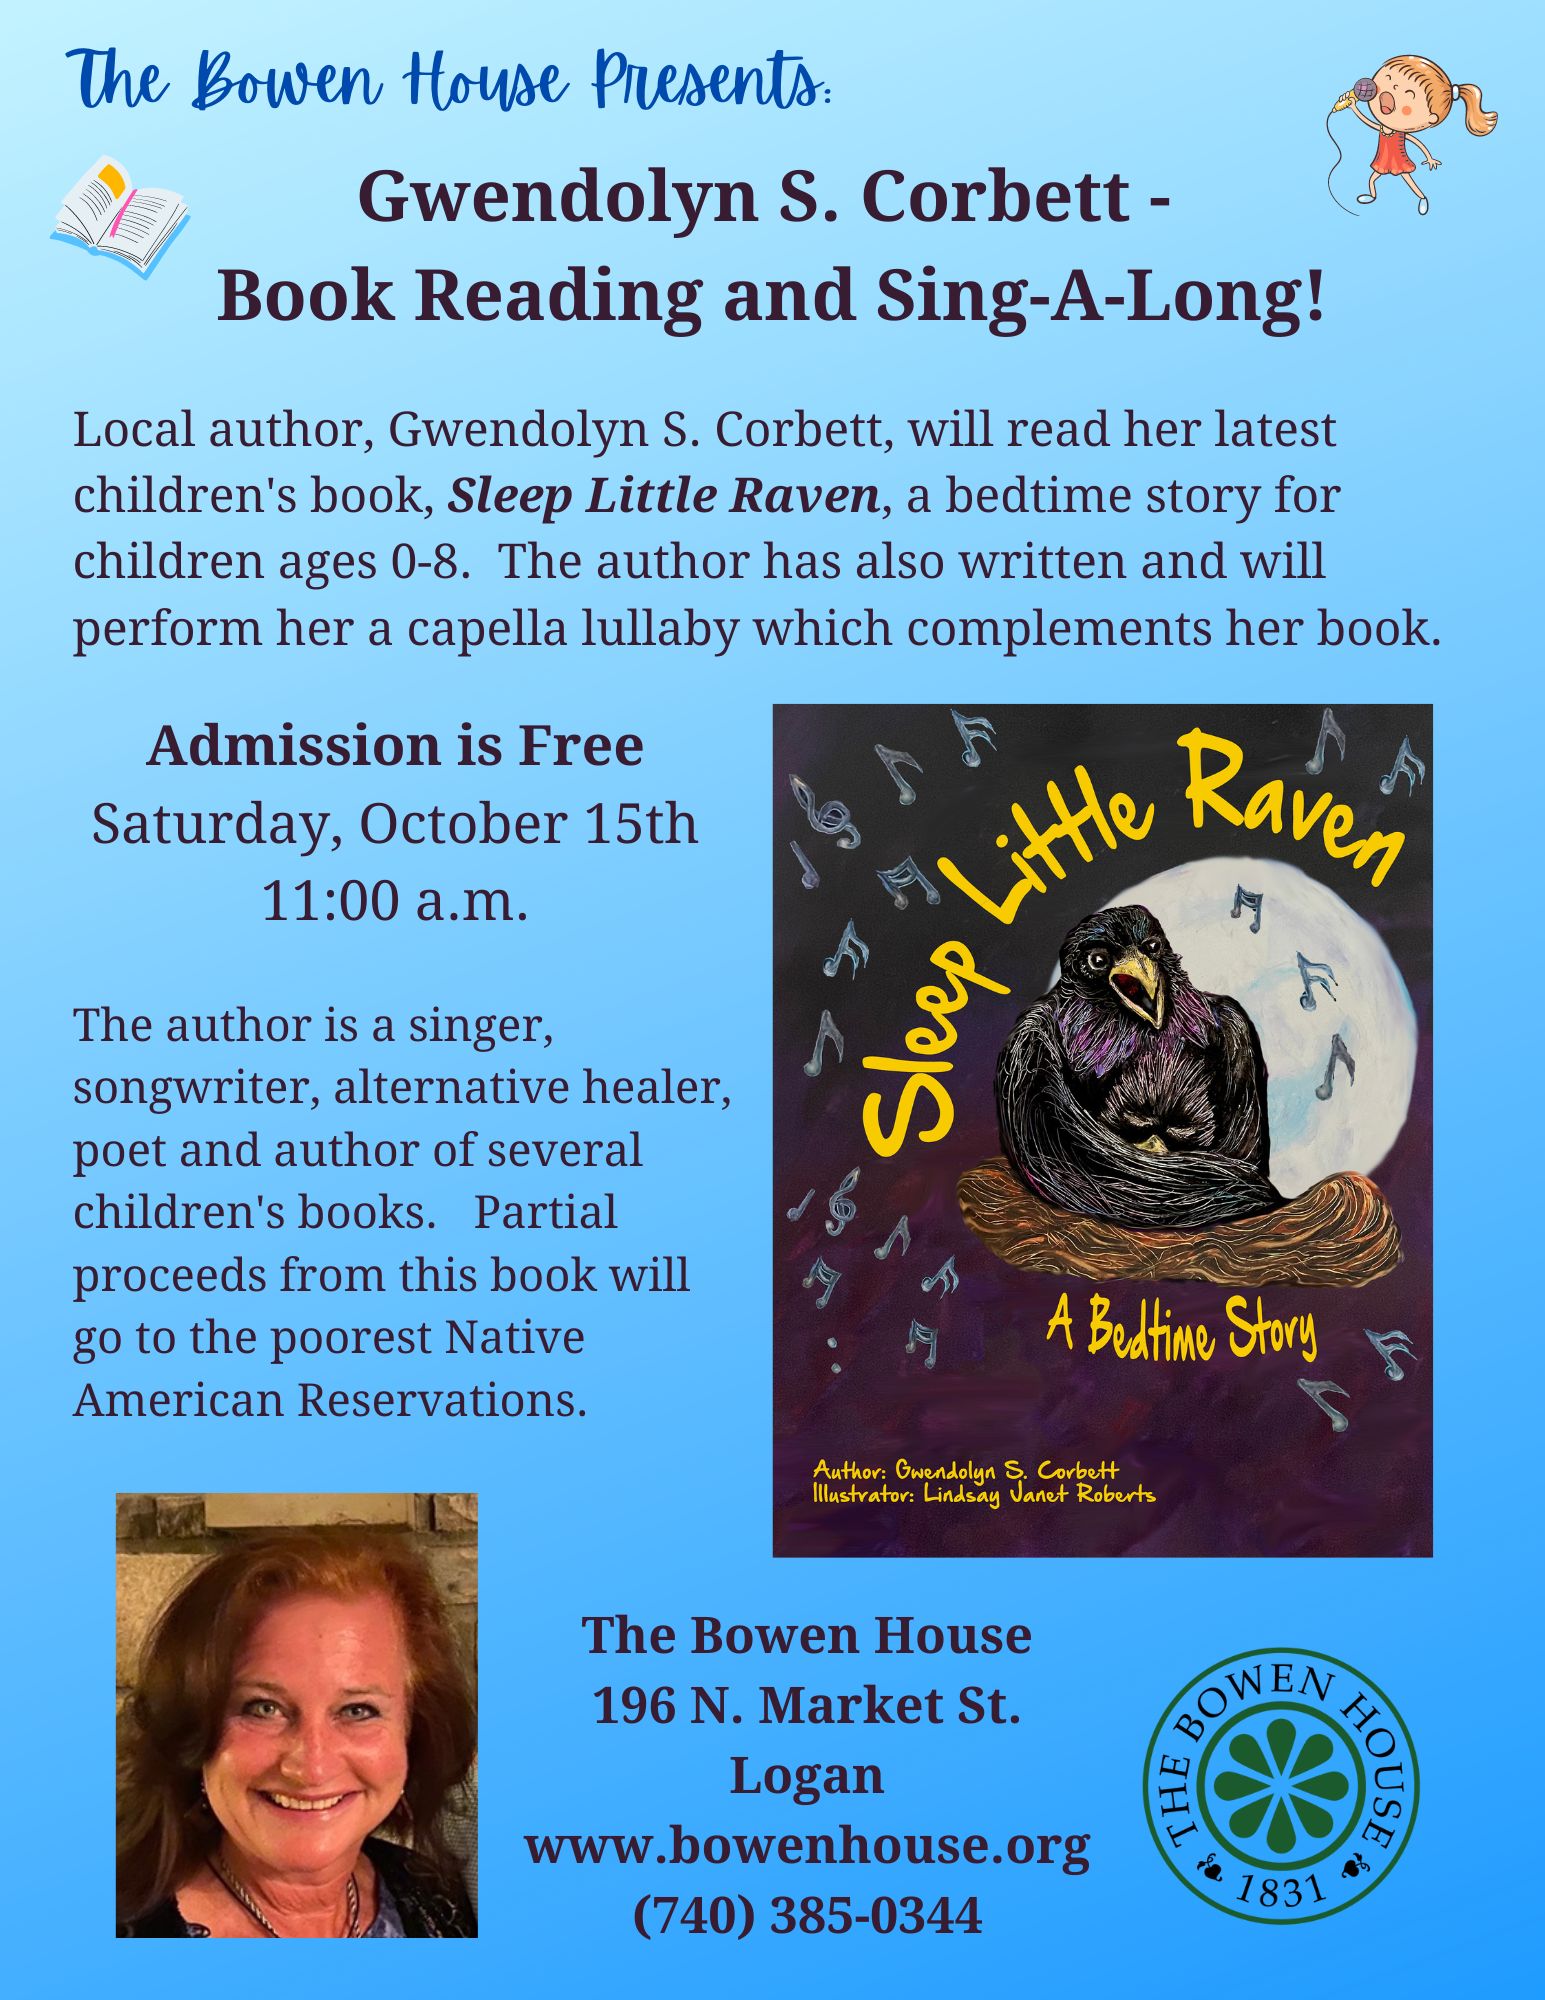 A flyer that reads: The Bowen House Presents: Gwendolyn S. Corbett - Book Reading and Sing-a-Long! Local author Gwendolyn S. Corbett, will read her latest children’s book, “Sleep Little Raven,” a bedtime story for children ages 0-8. The author has also written and will perform her a cappella lullaby which compliments her book. Admission is free. Saturday, October 15th, 11 a.m. The author is a singer, songwriter, alternative healer, poet, and author of several children’s books. Partial proceeds from this book will go to the poorest Native American Reservations. The Bowen House 196 North Market Street, Logan, www.bowenhouse.org, 740-385-0344. The flyer is blue and has a picture of the author and also a picture of the cover of her book.